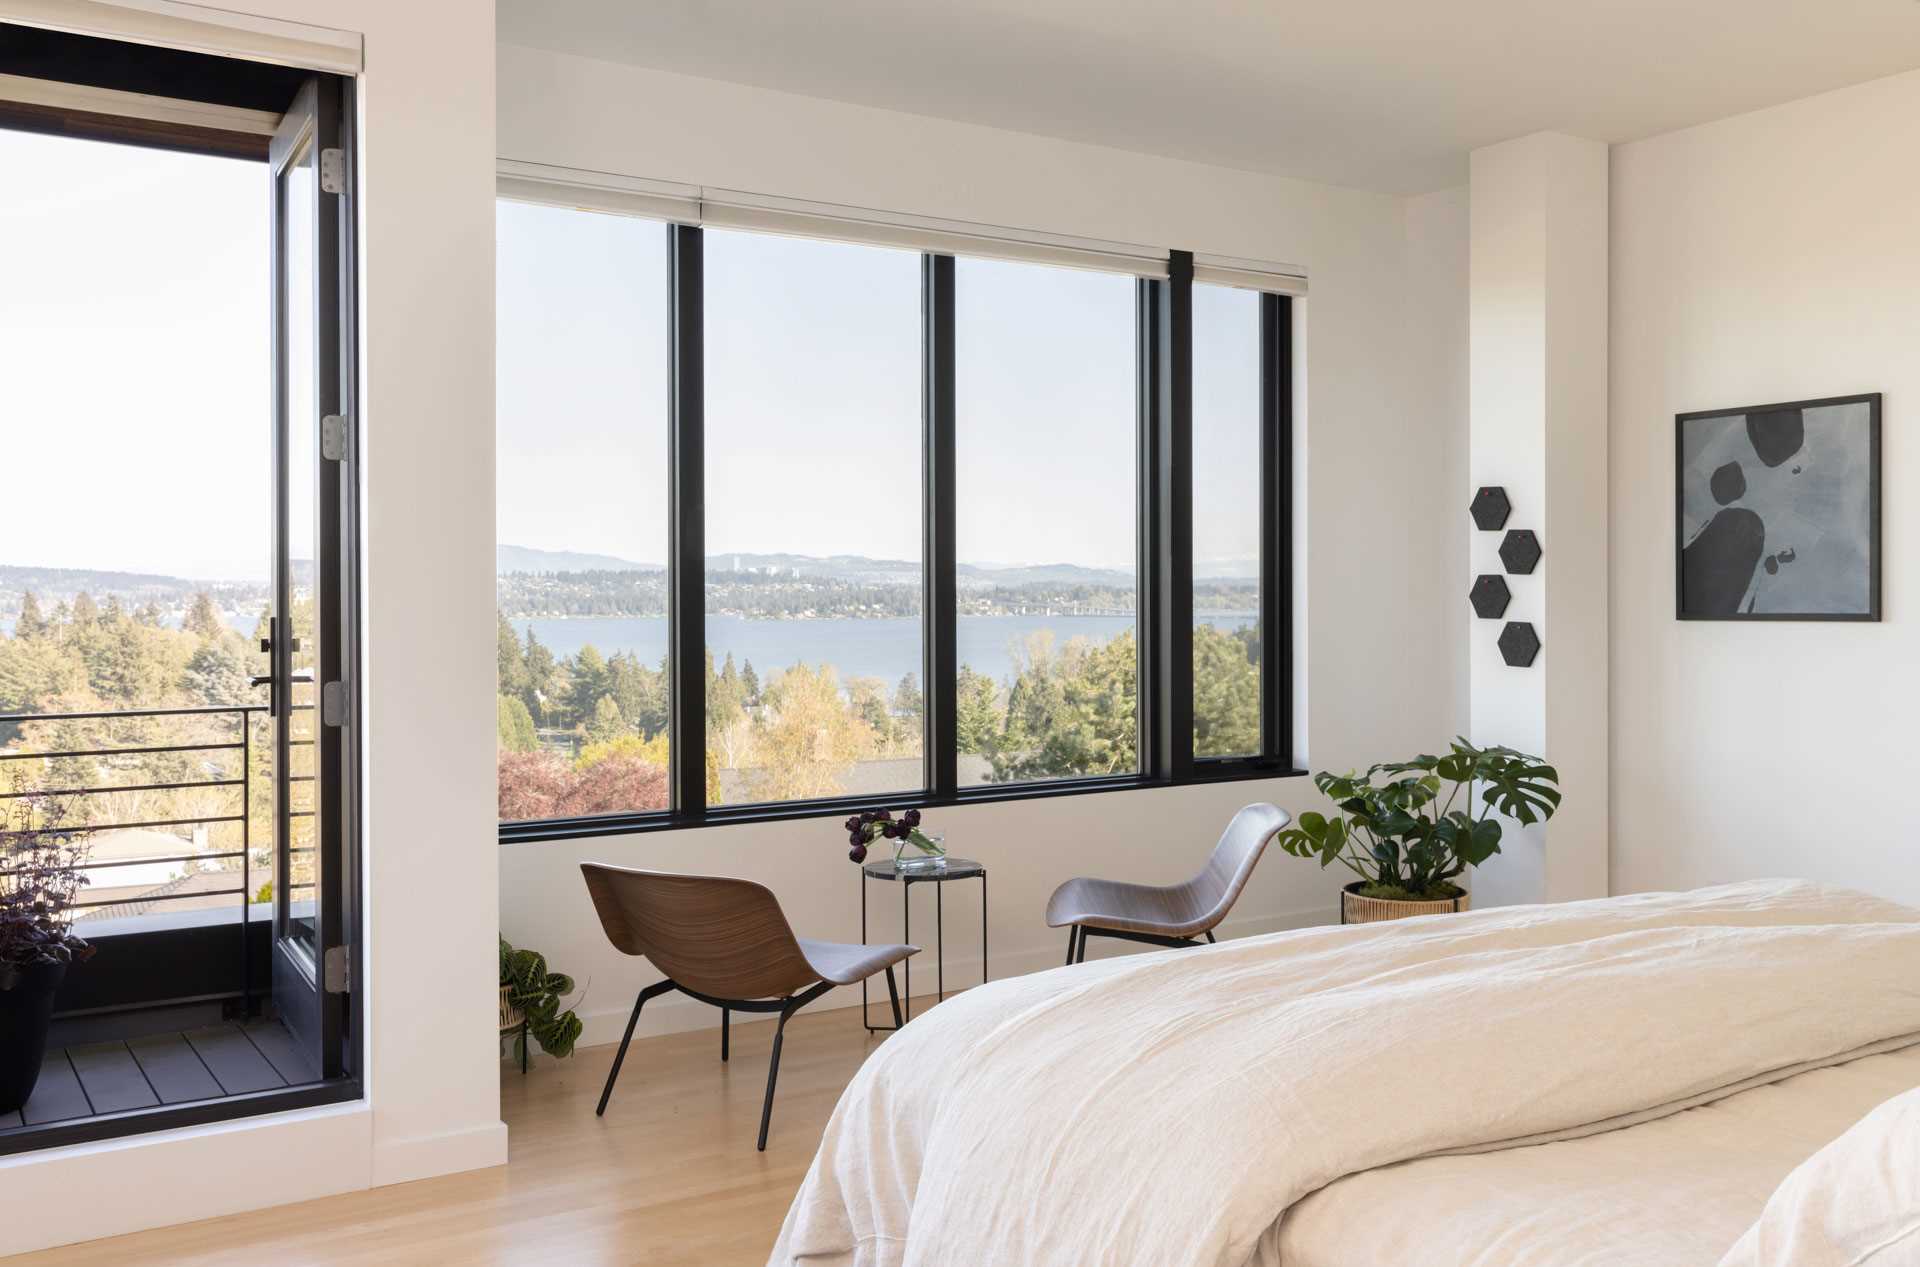 This primary bedroom was relocated from the basement to a newly added third story. Black-framed windows allow for a picturesque view.